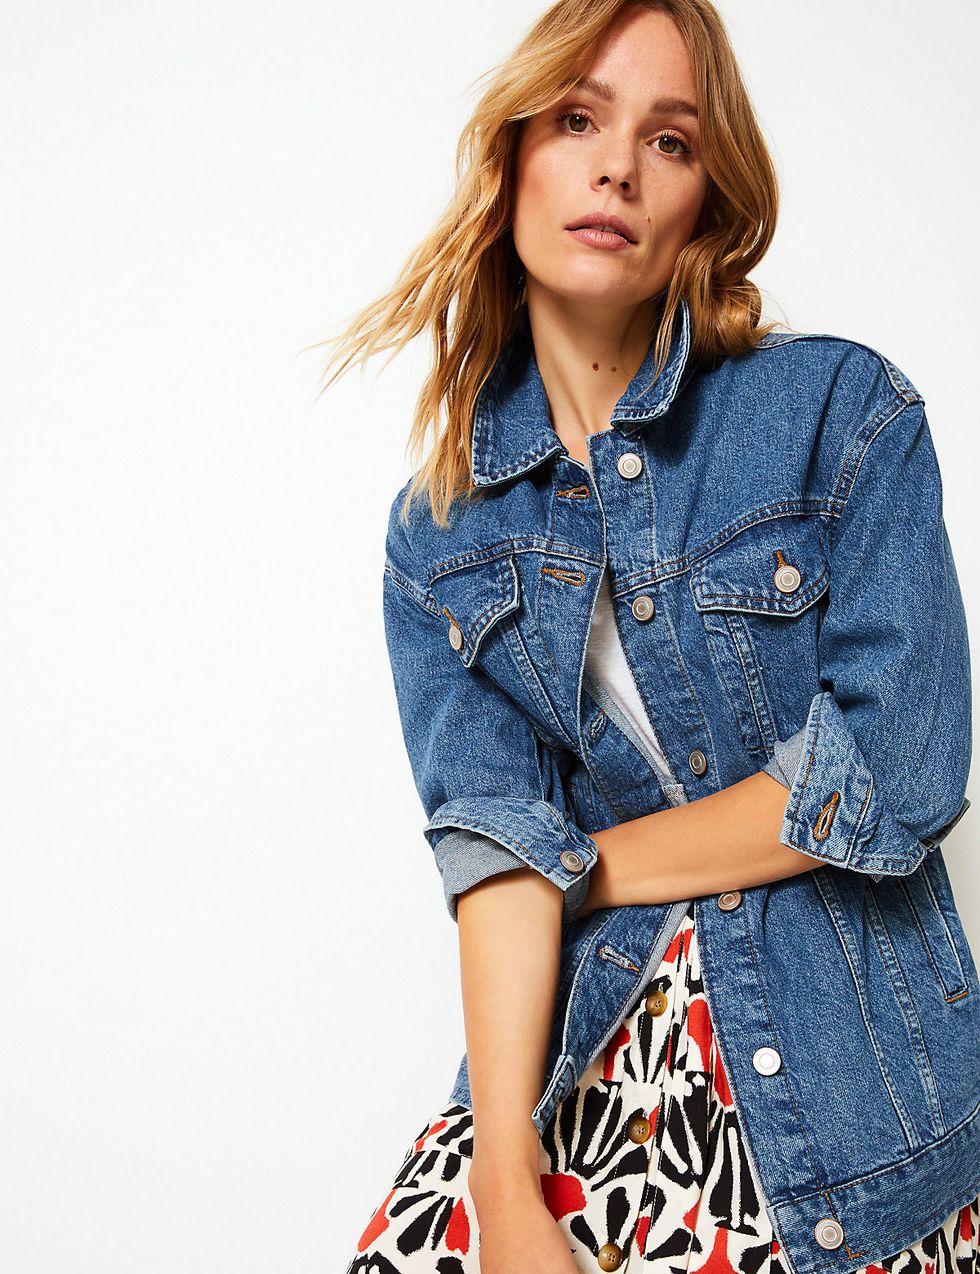 11 stylish denim jackets for summer 2023: From M&S to ASOS, Levi's